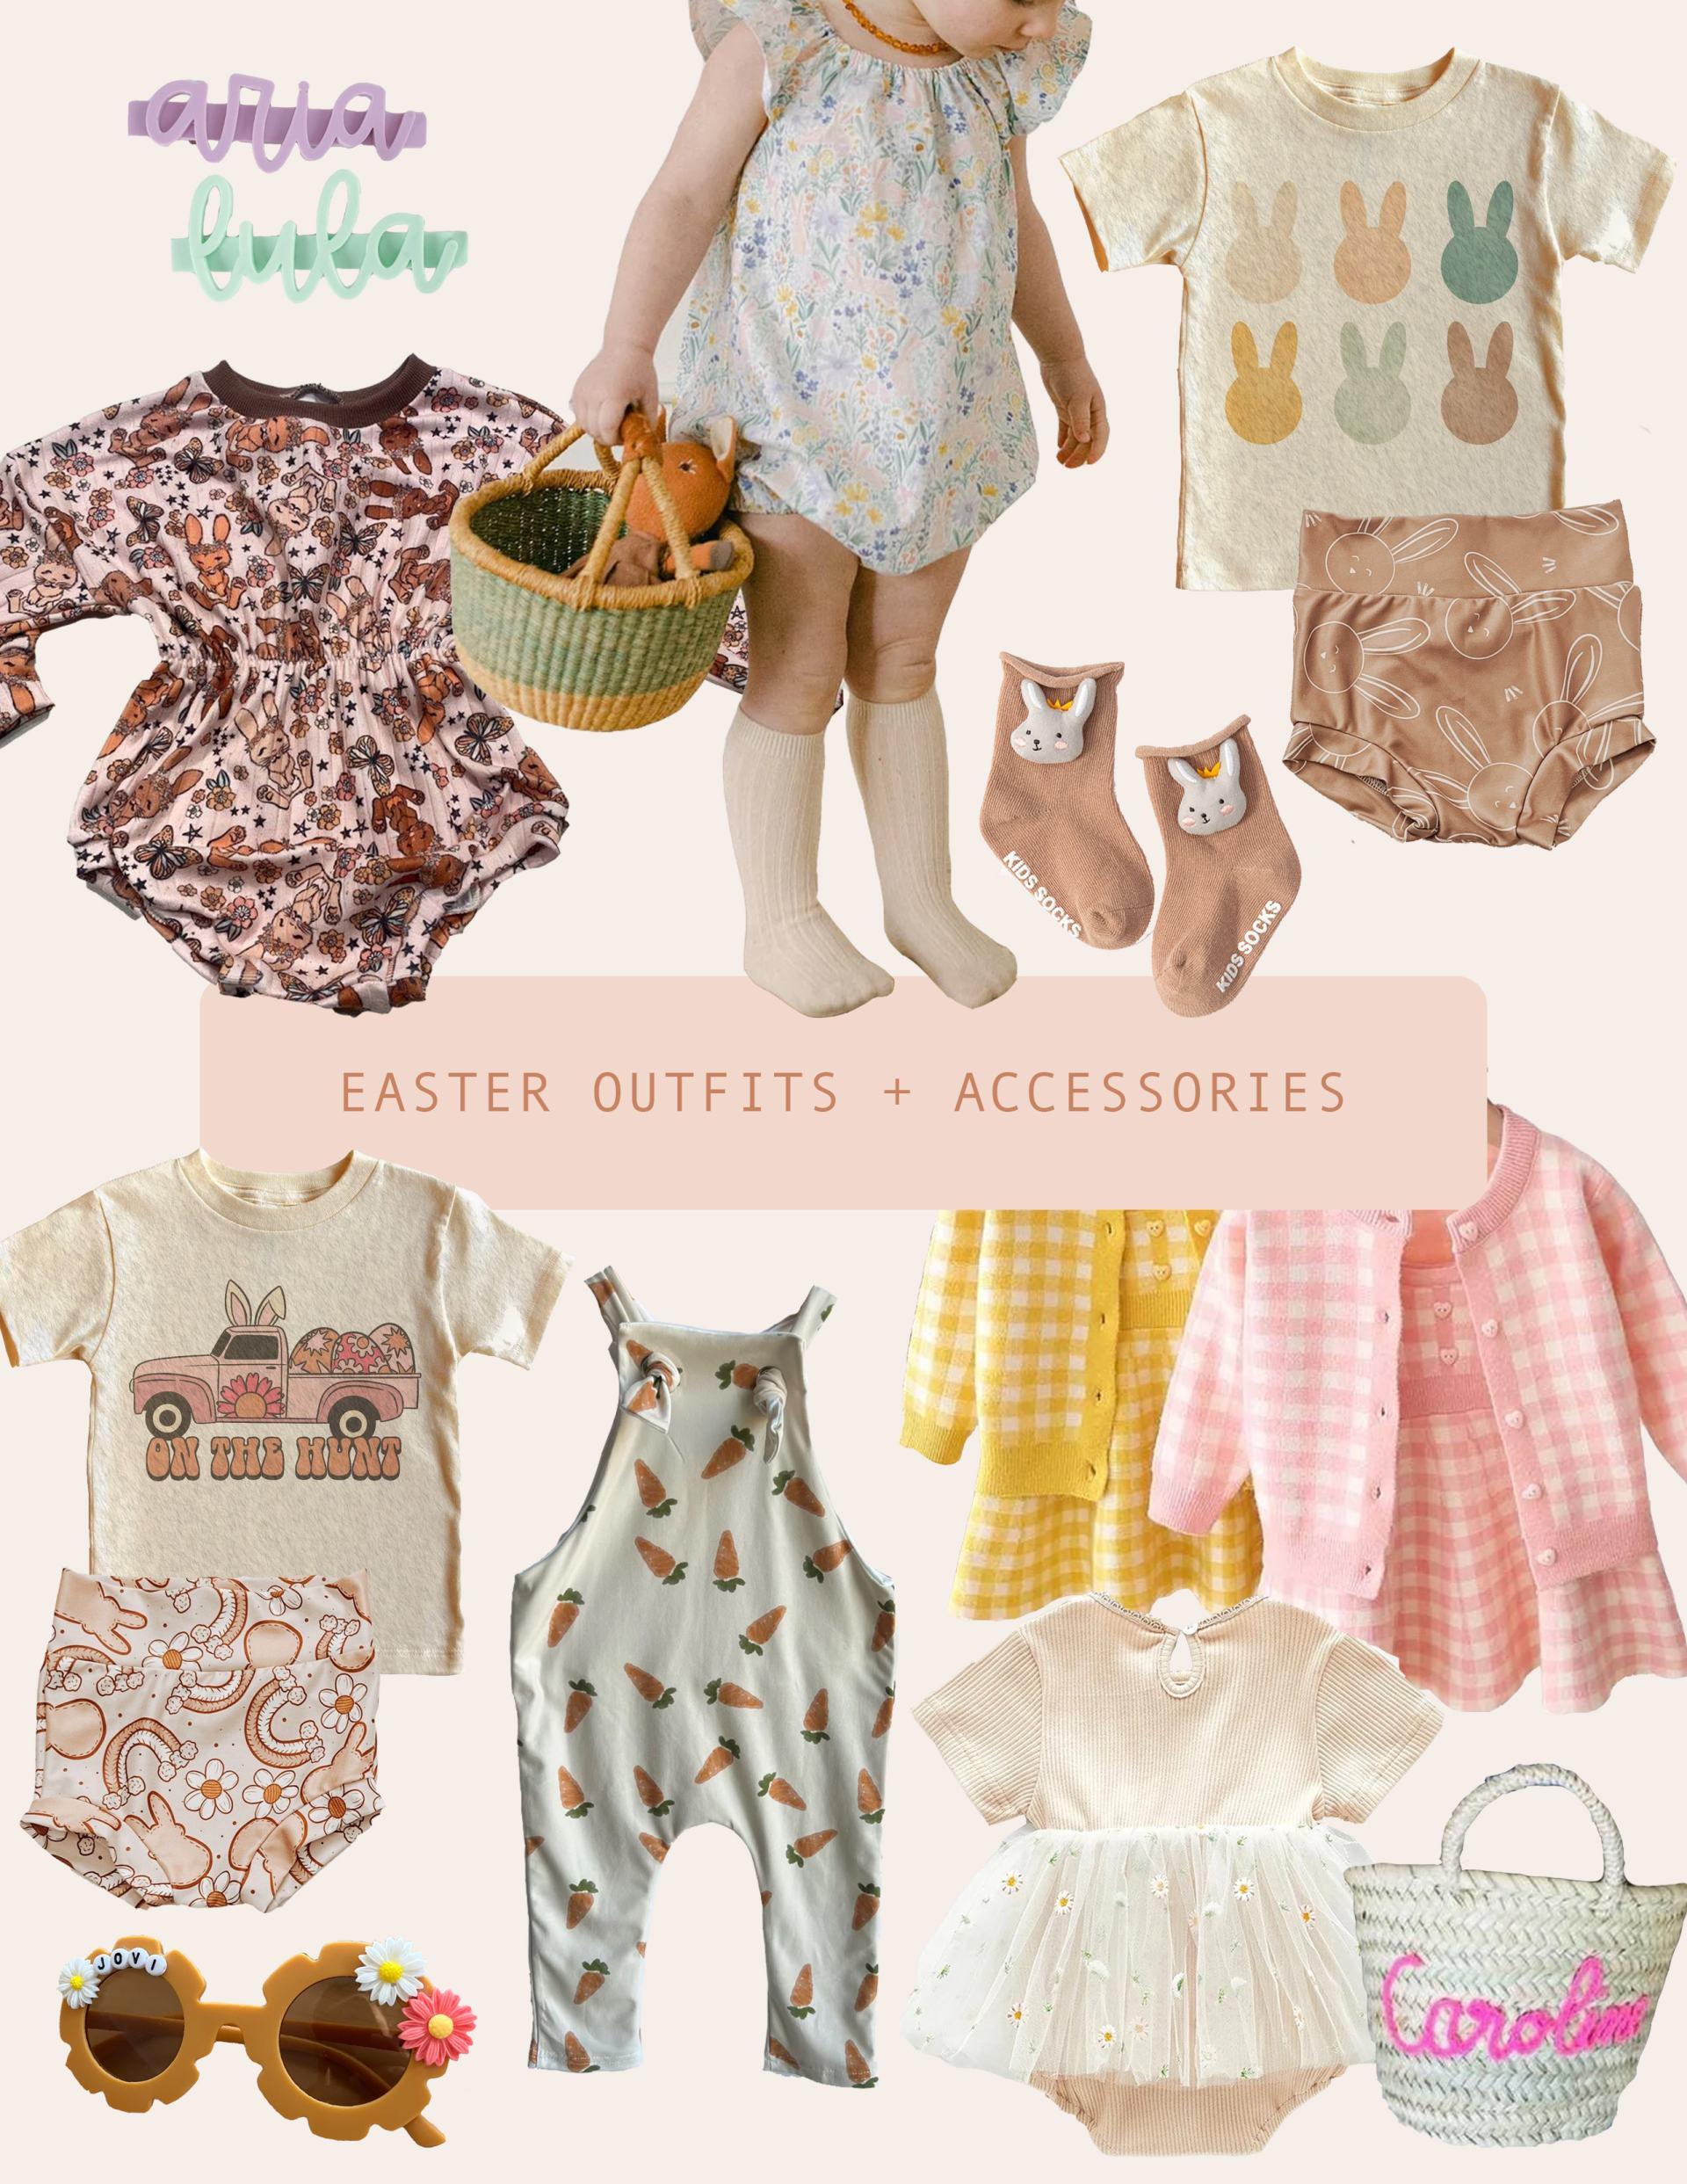 Easter Outfits + Accessories for Toddlers